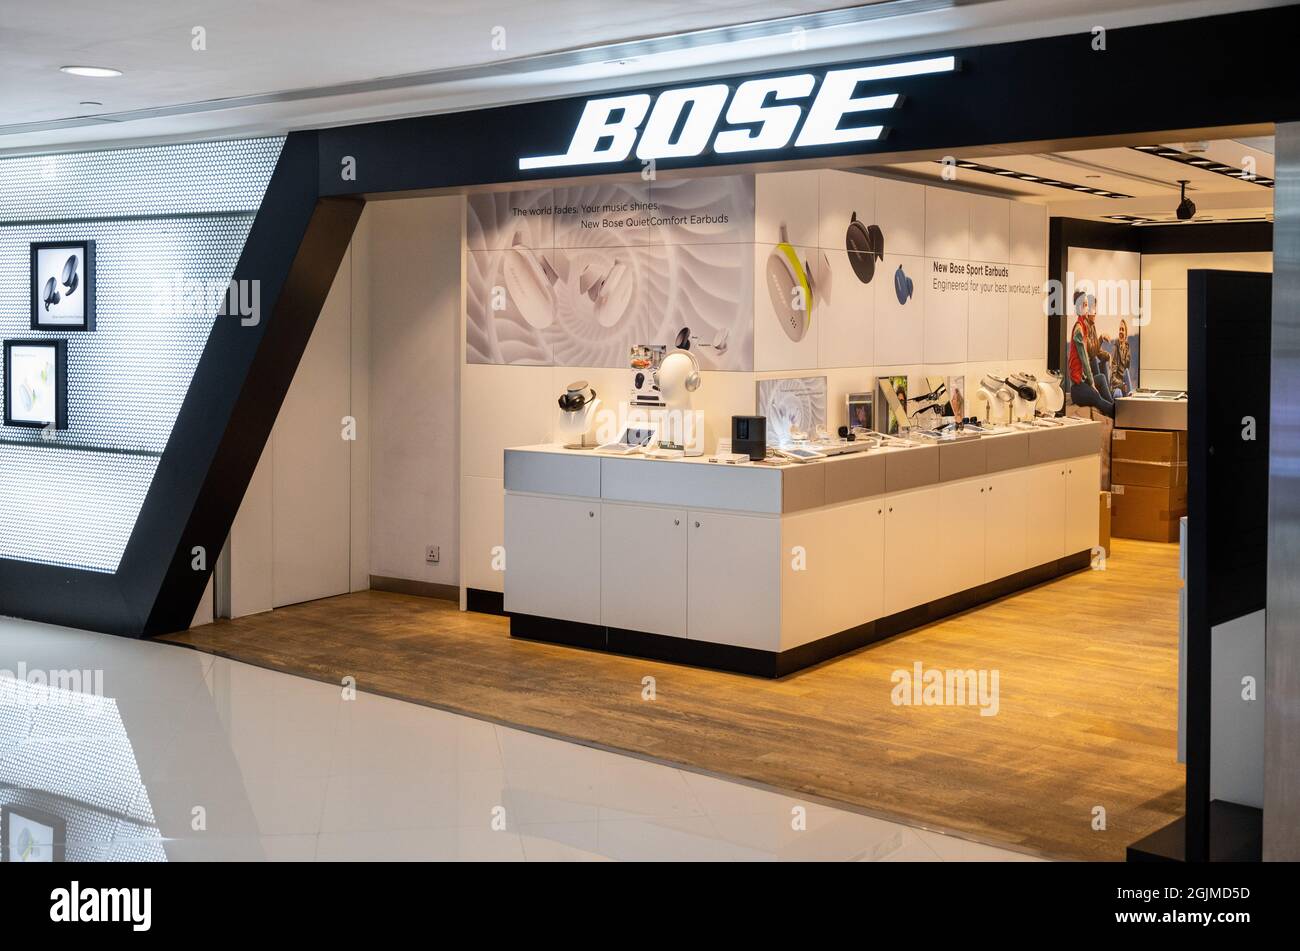 Bose Shop High Resolution Stock Photography and Images - Alamy